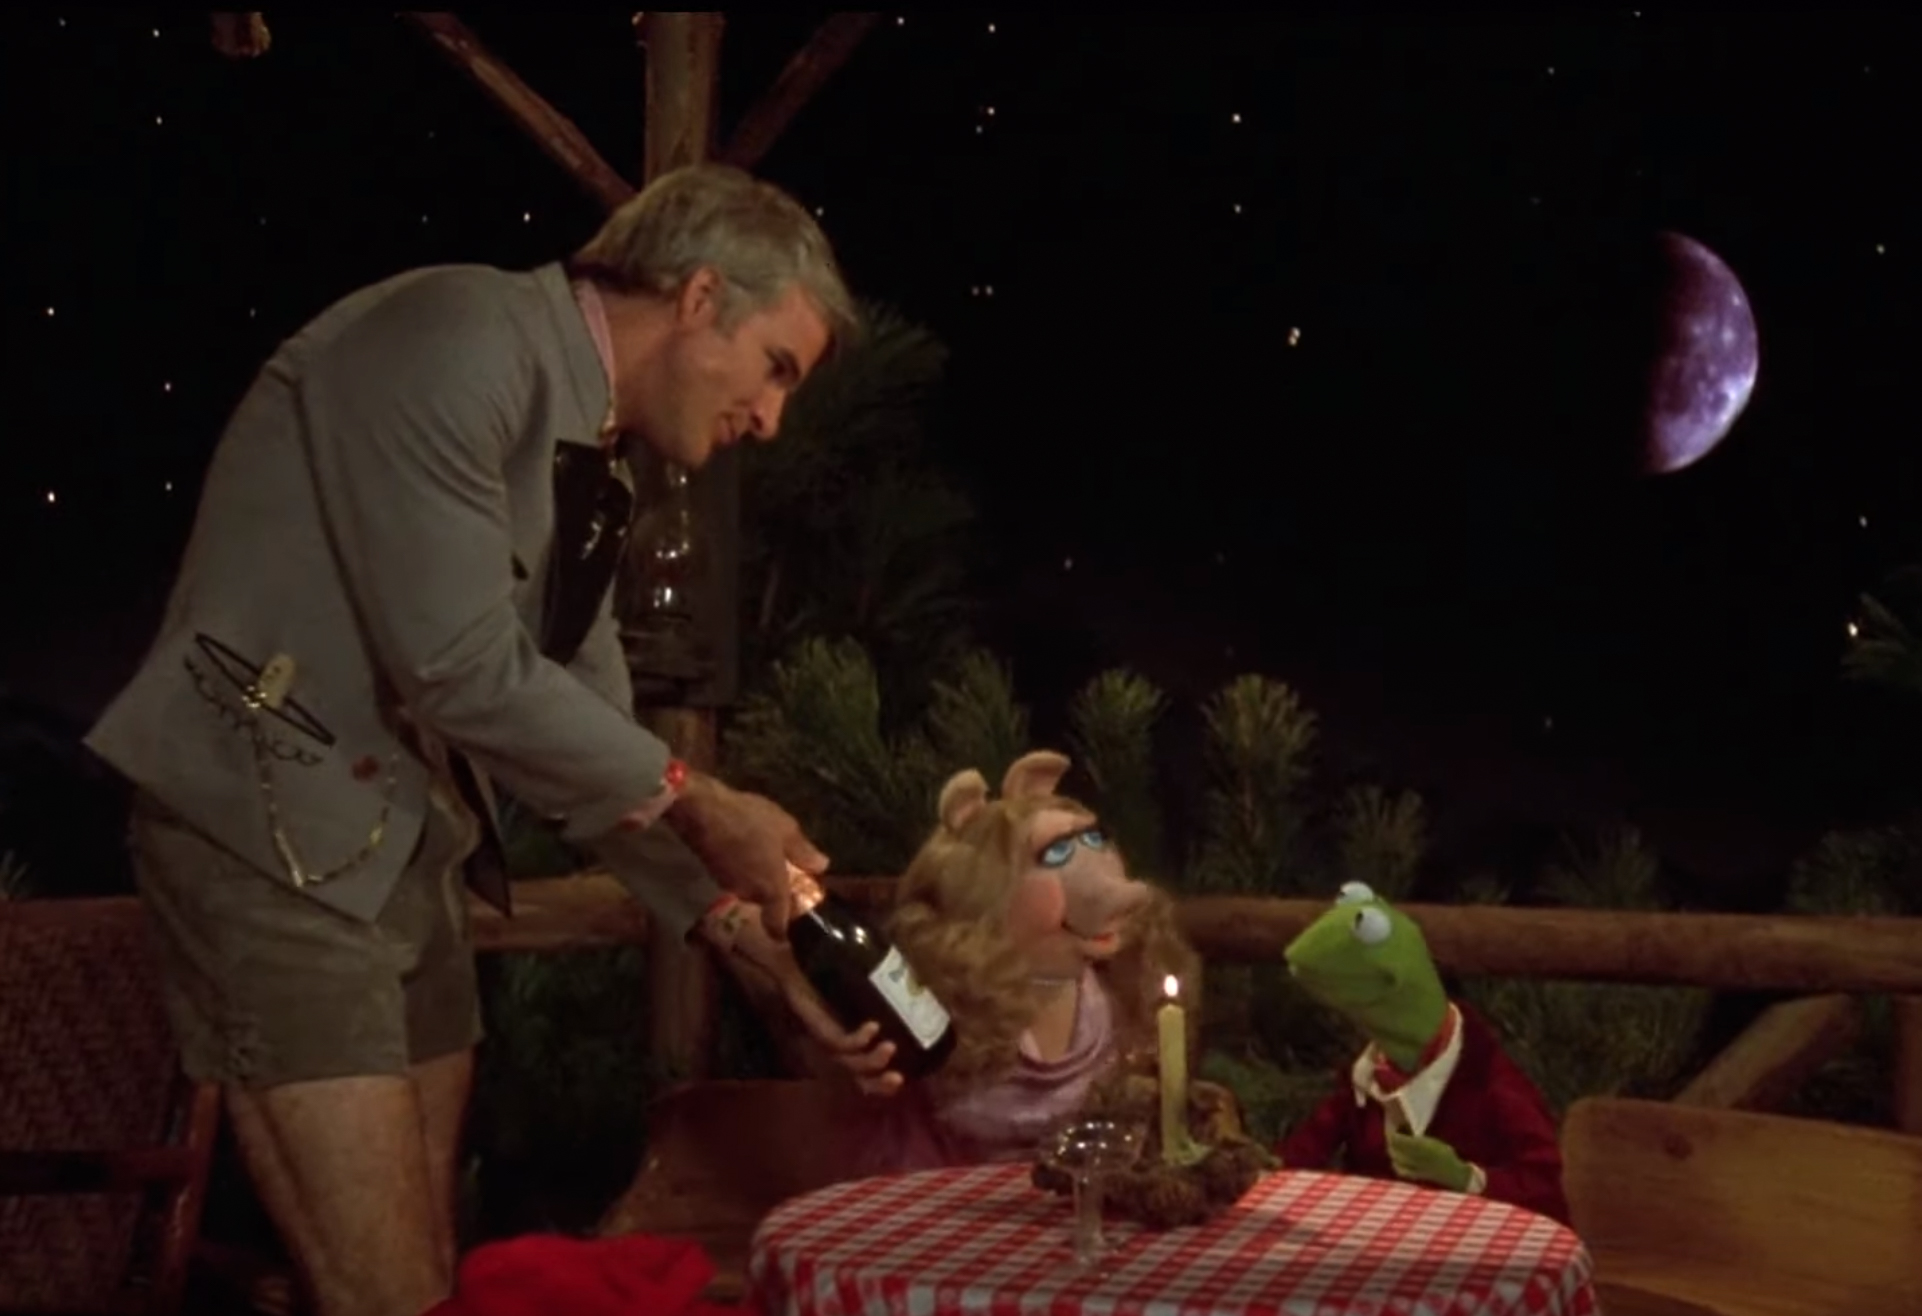 Steve Martin serving Kermit and Miss Piggy a bottle of 95 cents wine in The Muppet Movie